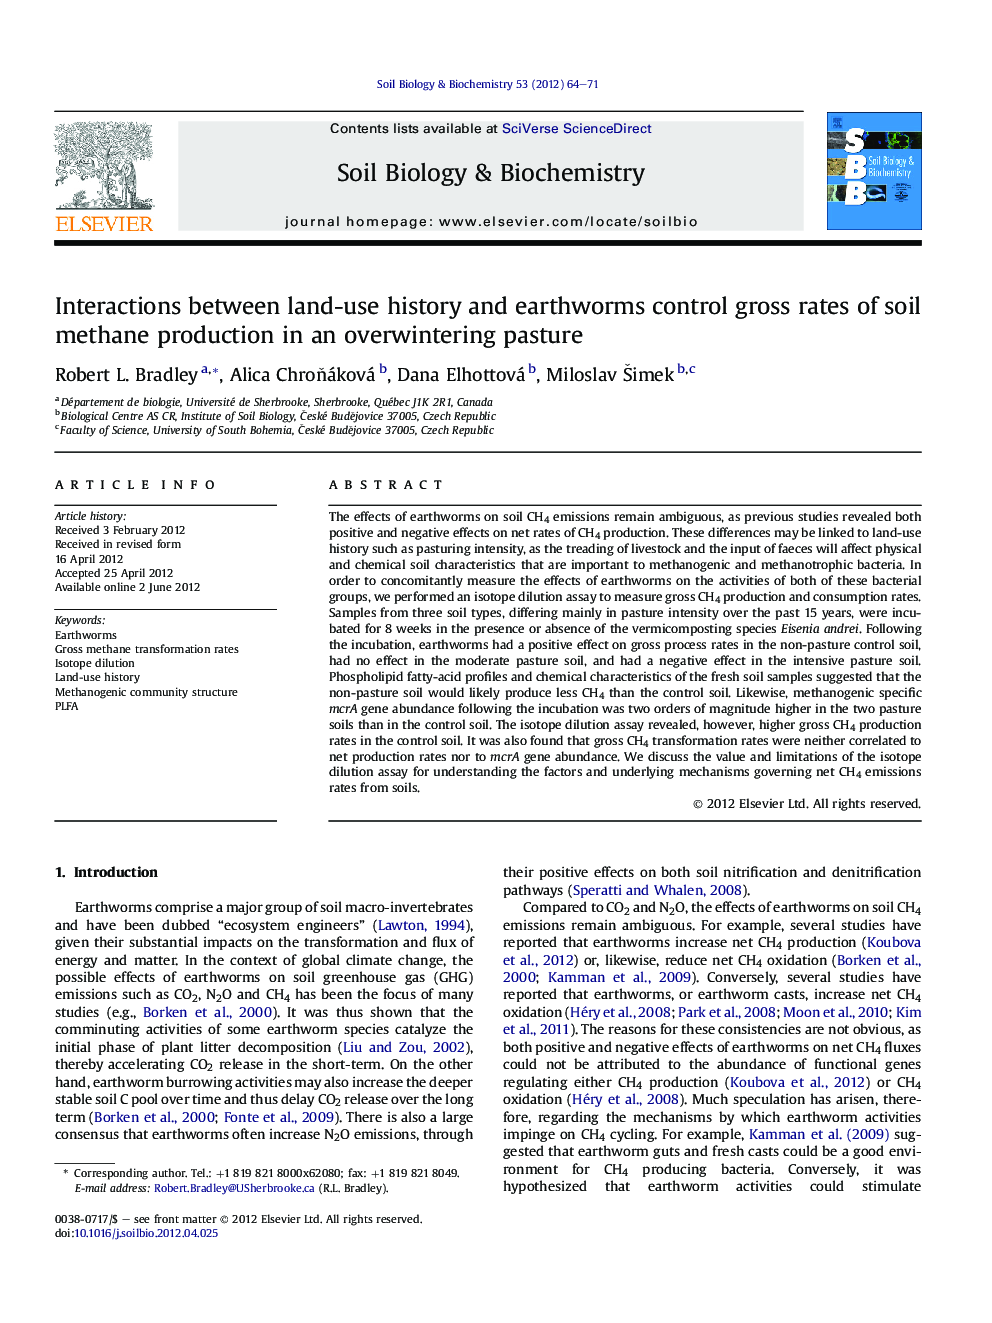 Interactions between land-use history and earthworms control gross rates of soil methane production in an overwintering pasture